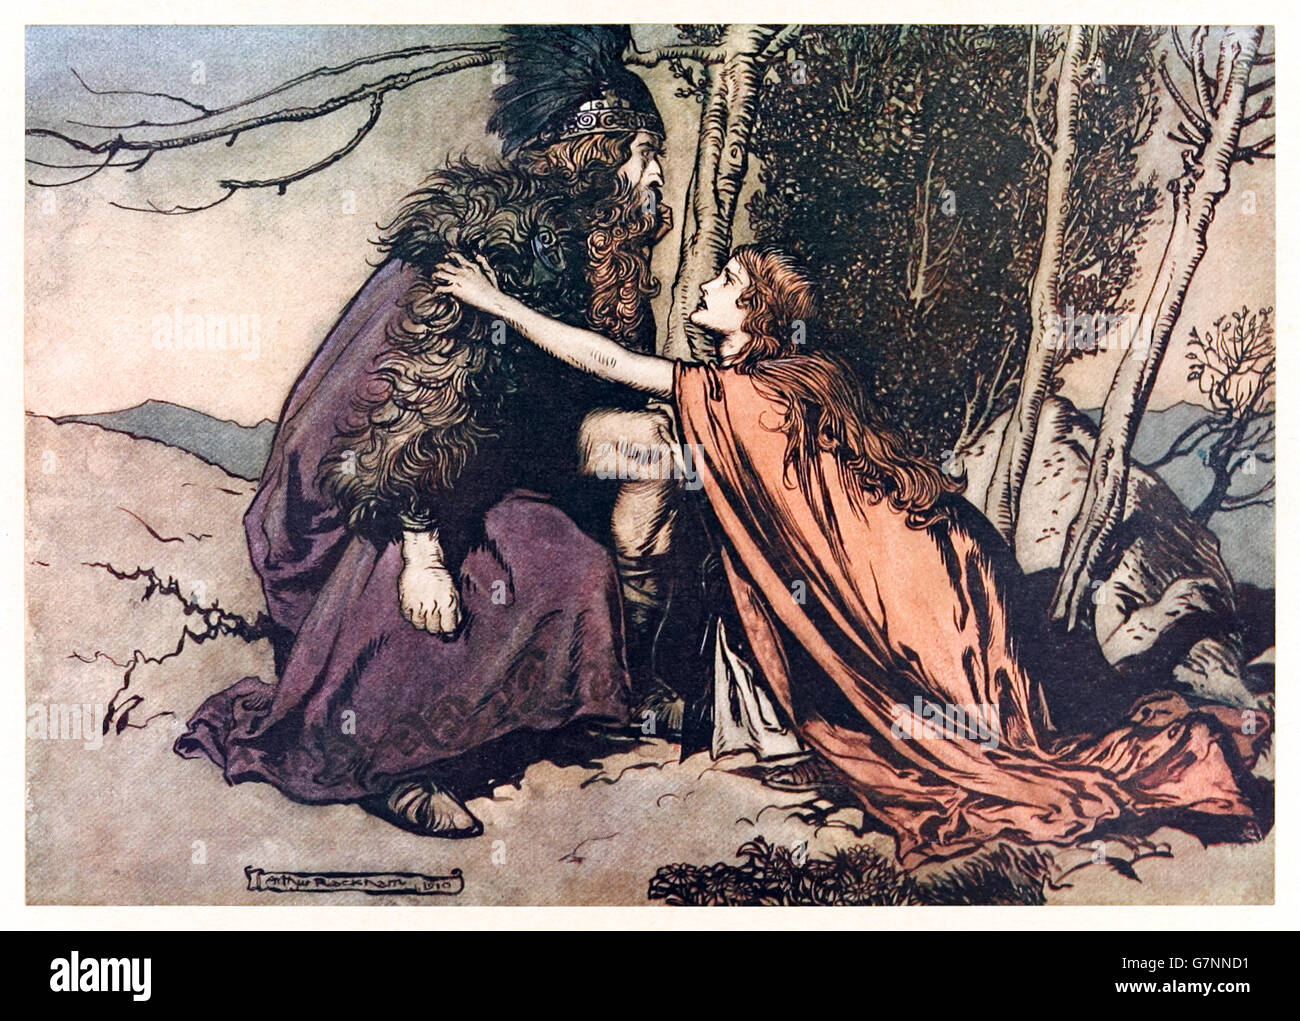 Brunnhilde: “Father! Father! Tell me what ails thee? With dismay thou art filling thy child!” from ‘The Rhinegold & the Valkyrie’ illustrated by Arthur Rackham (1867-1939), published in 1910. Brunnhilde finds her father Wotan in a state of despair after Fricka his wife demands his beloved son Siegmund must die thereby destroying his plan to reclaim the ring. Stock Photo